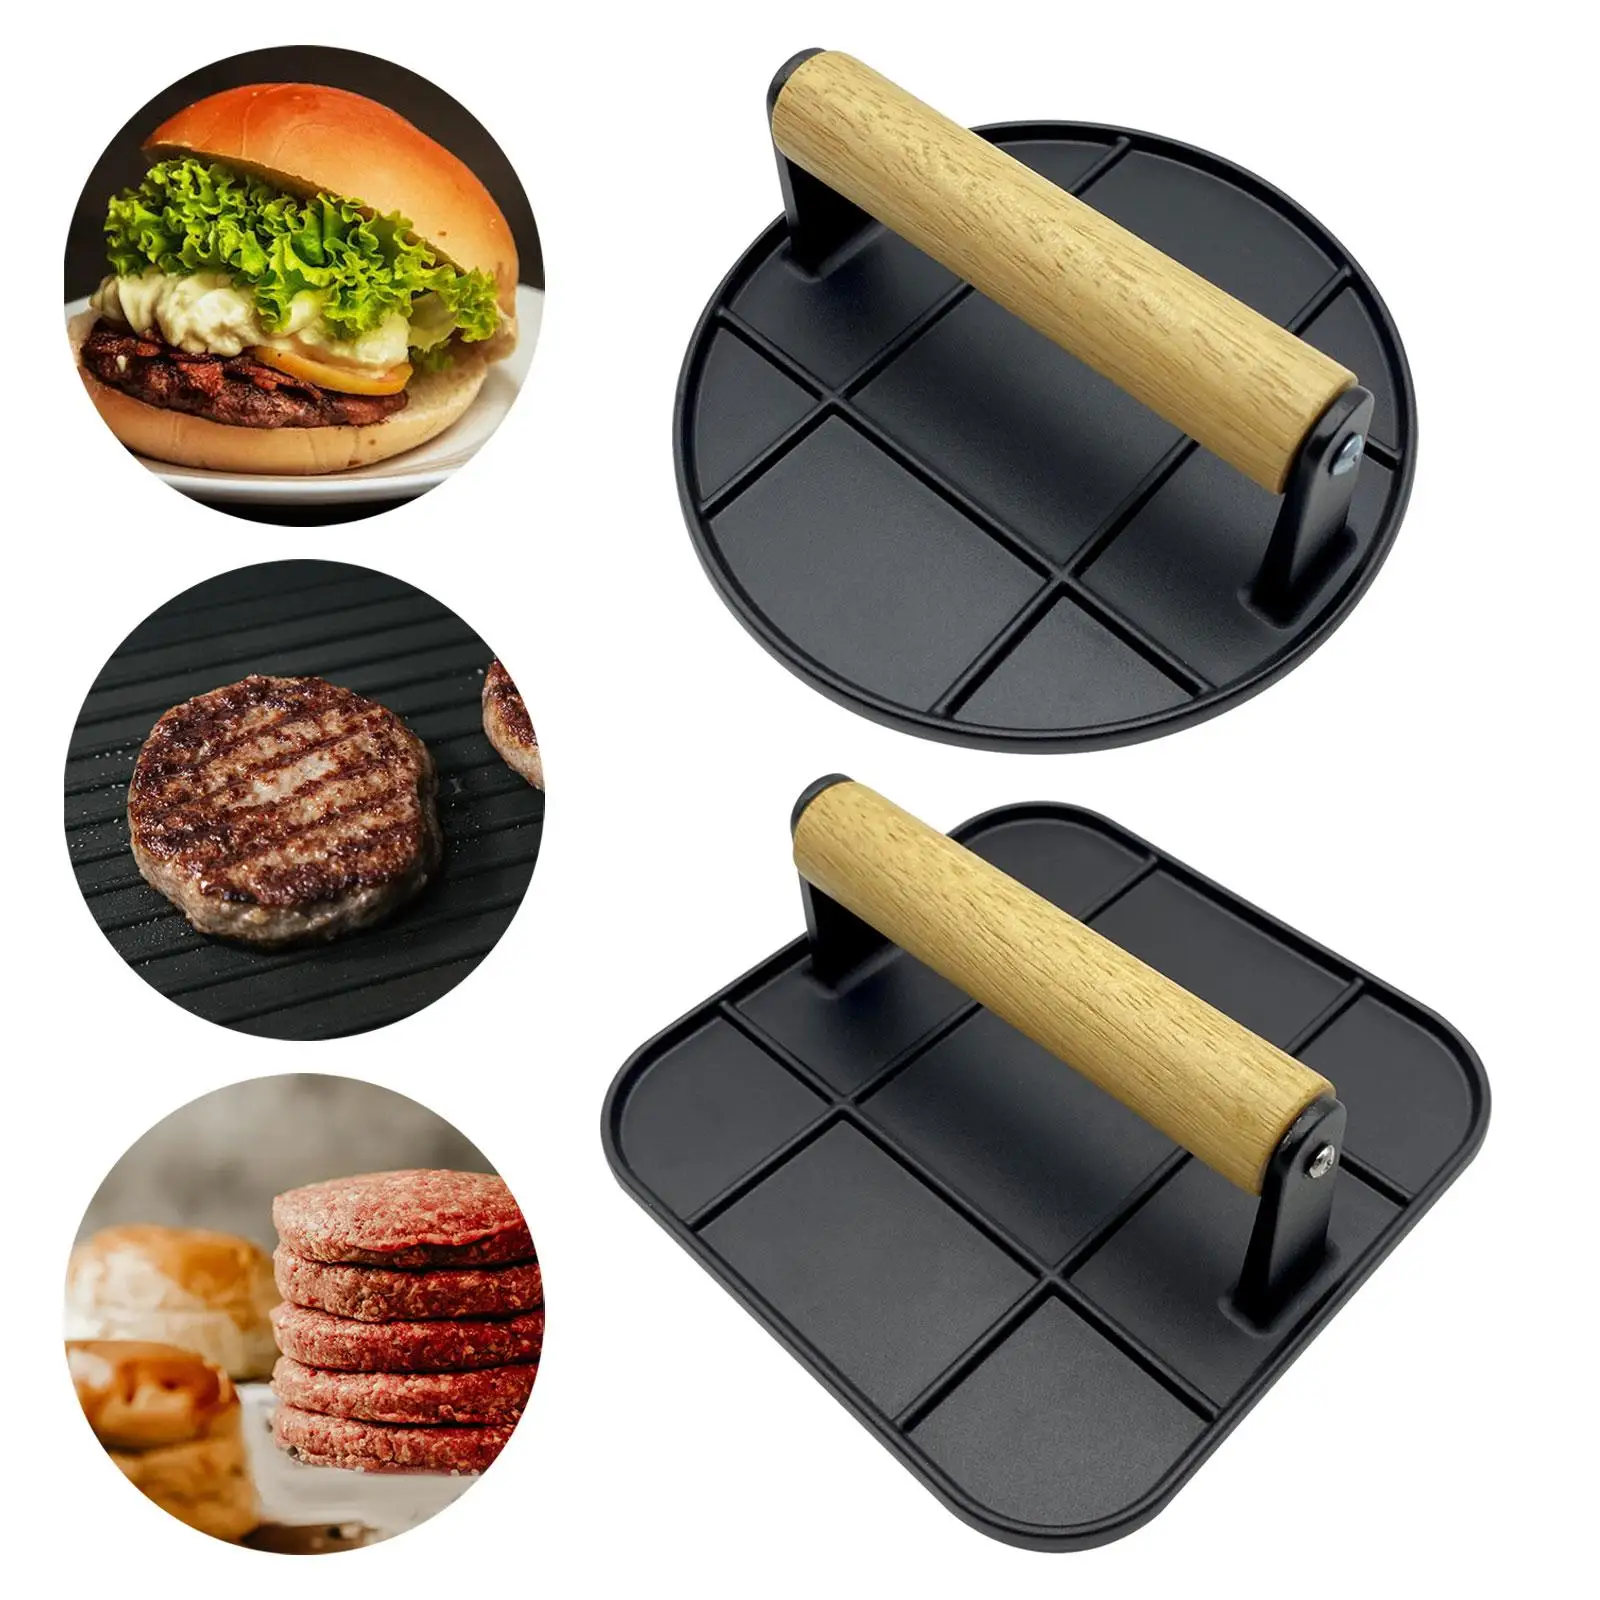 Burger Press Kitchen Gadget Nonstick Grill Press for Meat Grill Cooking